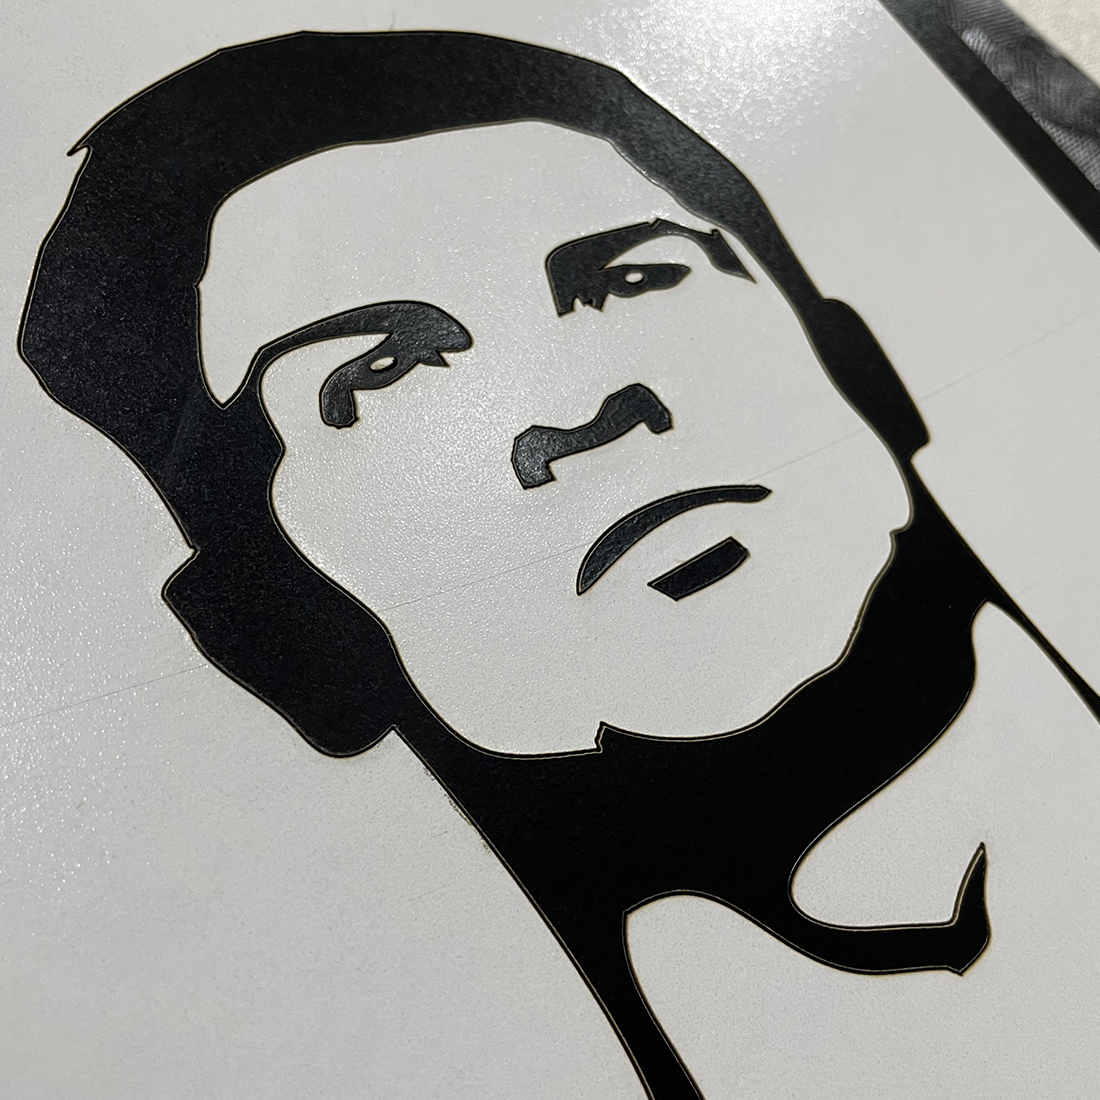 Drawing Cristiano Ronaldo by M0t0rbr3ath on DeviantArt